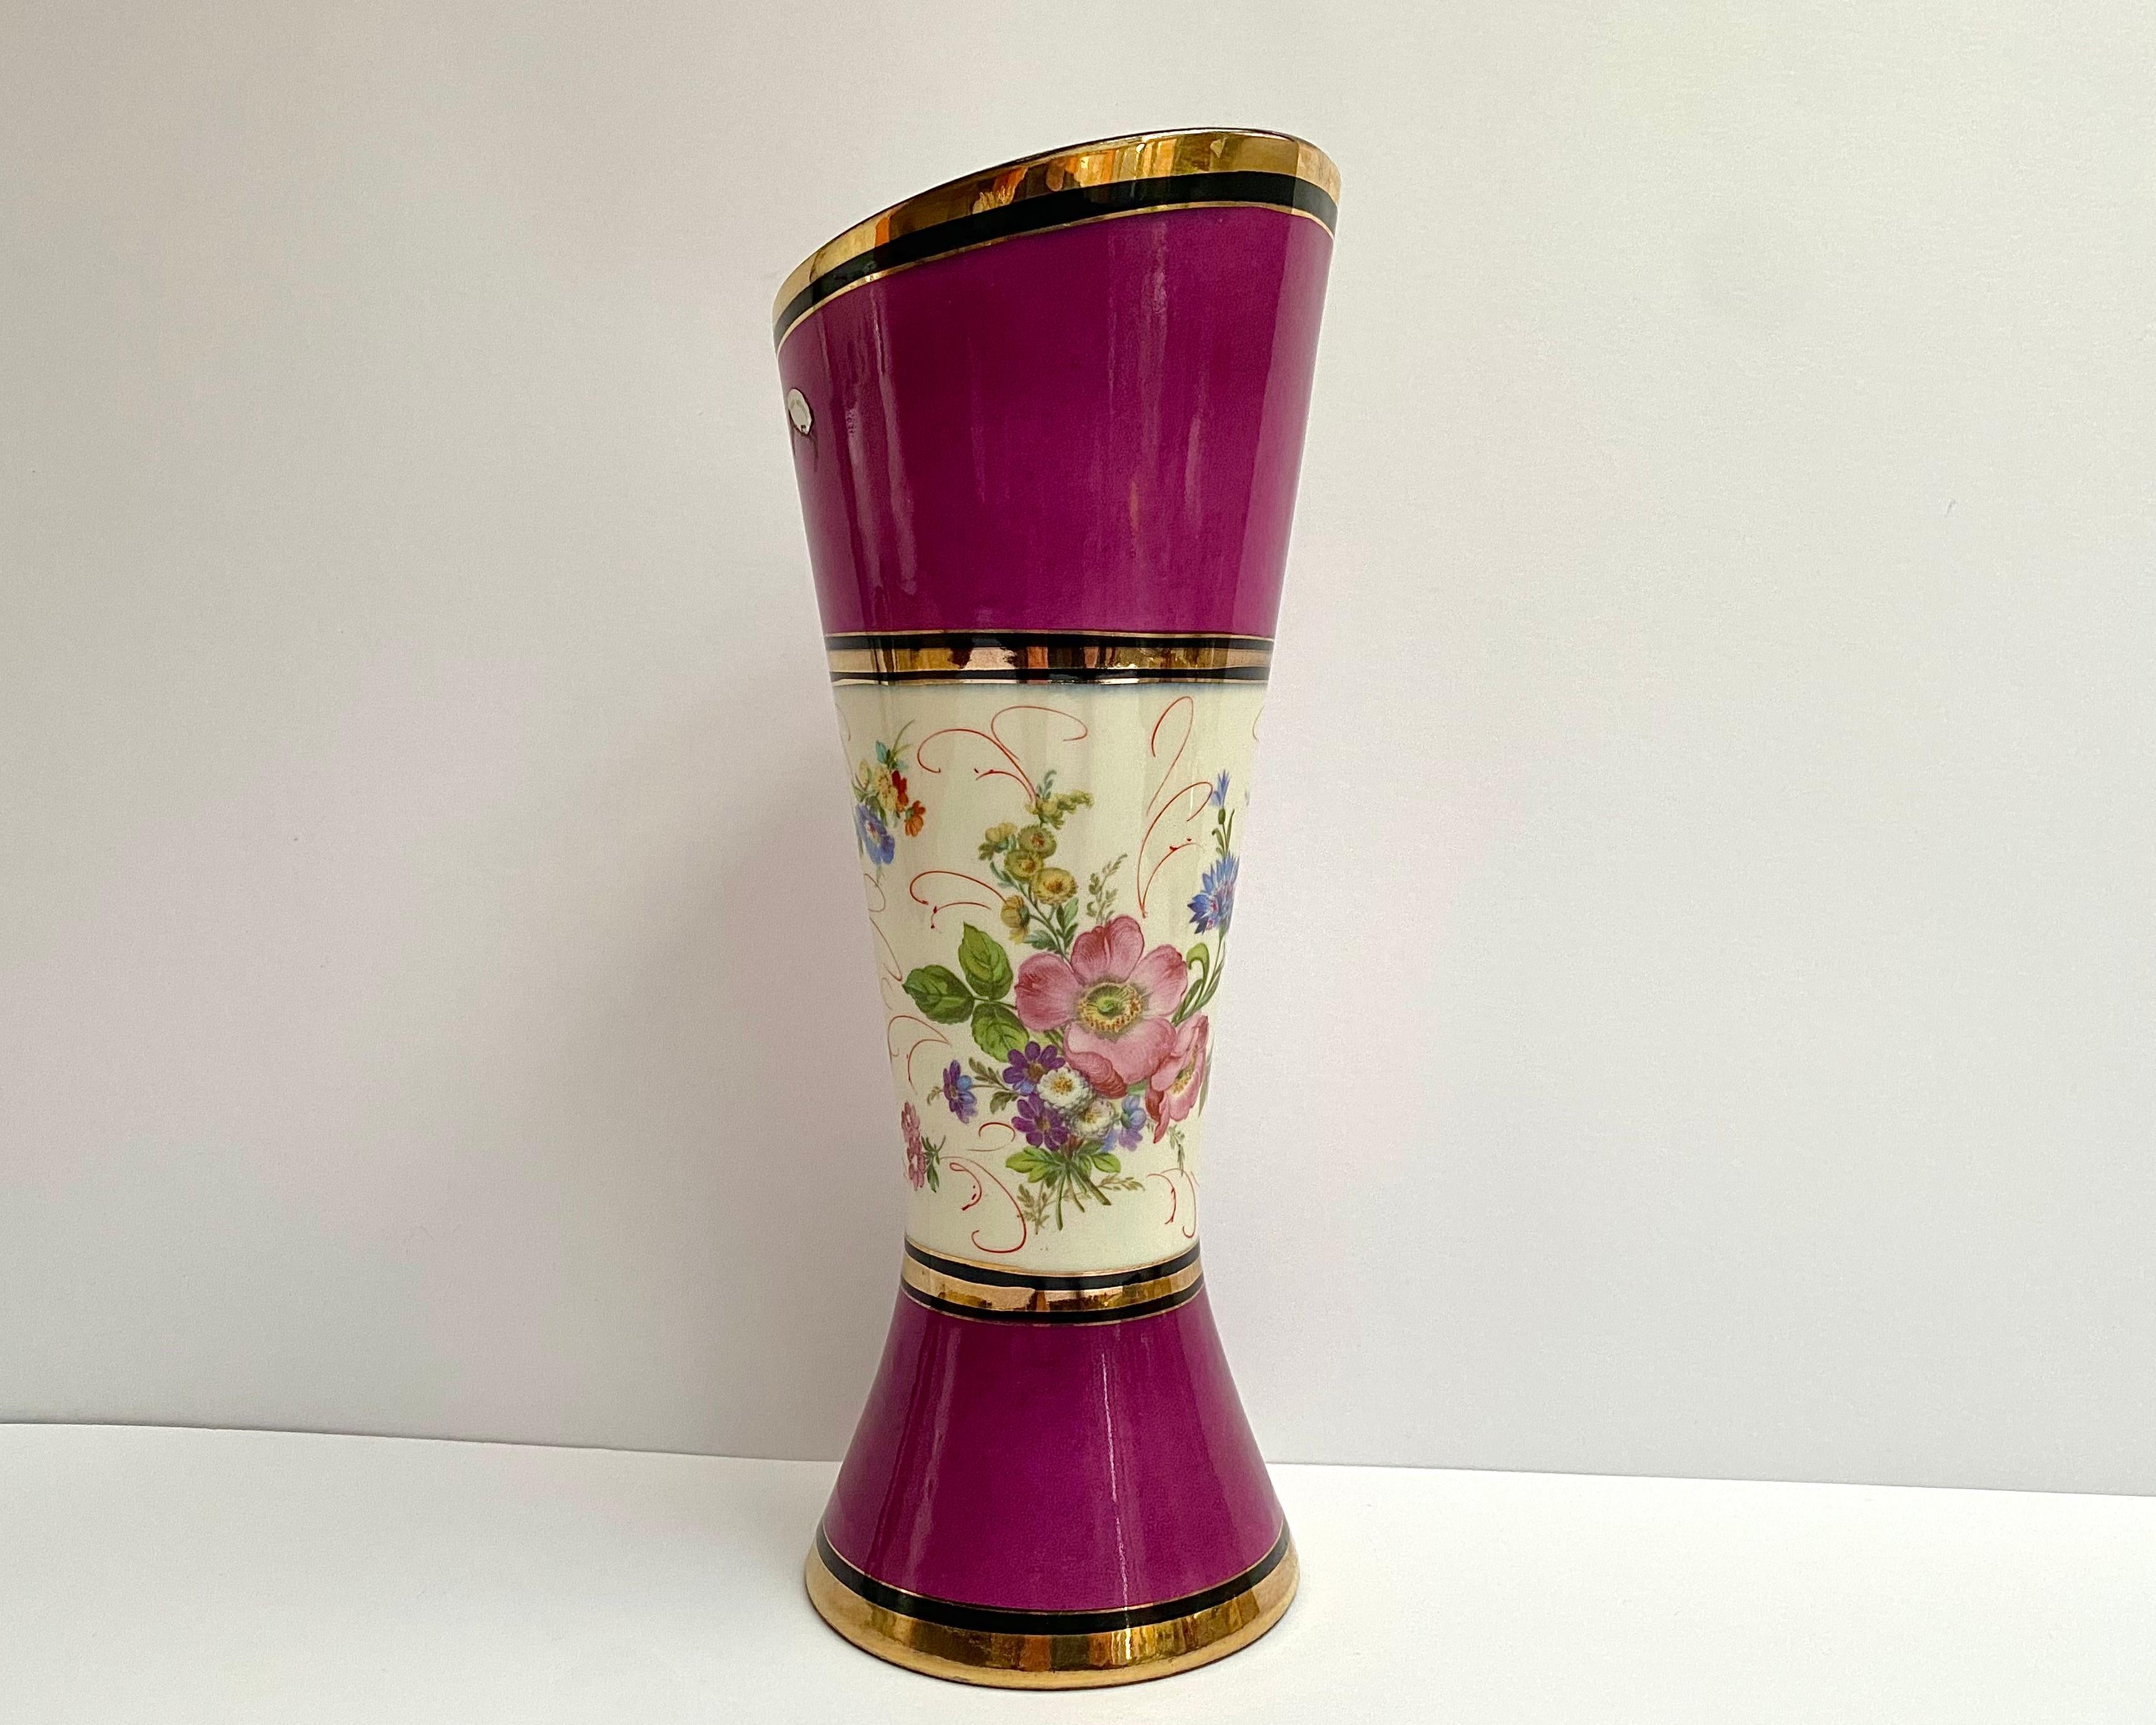 Vintage vase for flowers. The vase was made at the H. Bequet porcelain factory from hard faience. 

For decoration, an overglaze decal, hand-painted in gold, is used.  Manufactured in 1950s.

A porcelain vase with an exquisite floral pattern will be